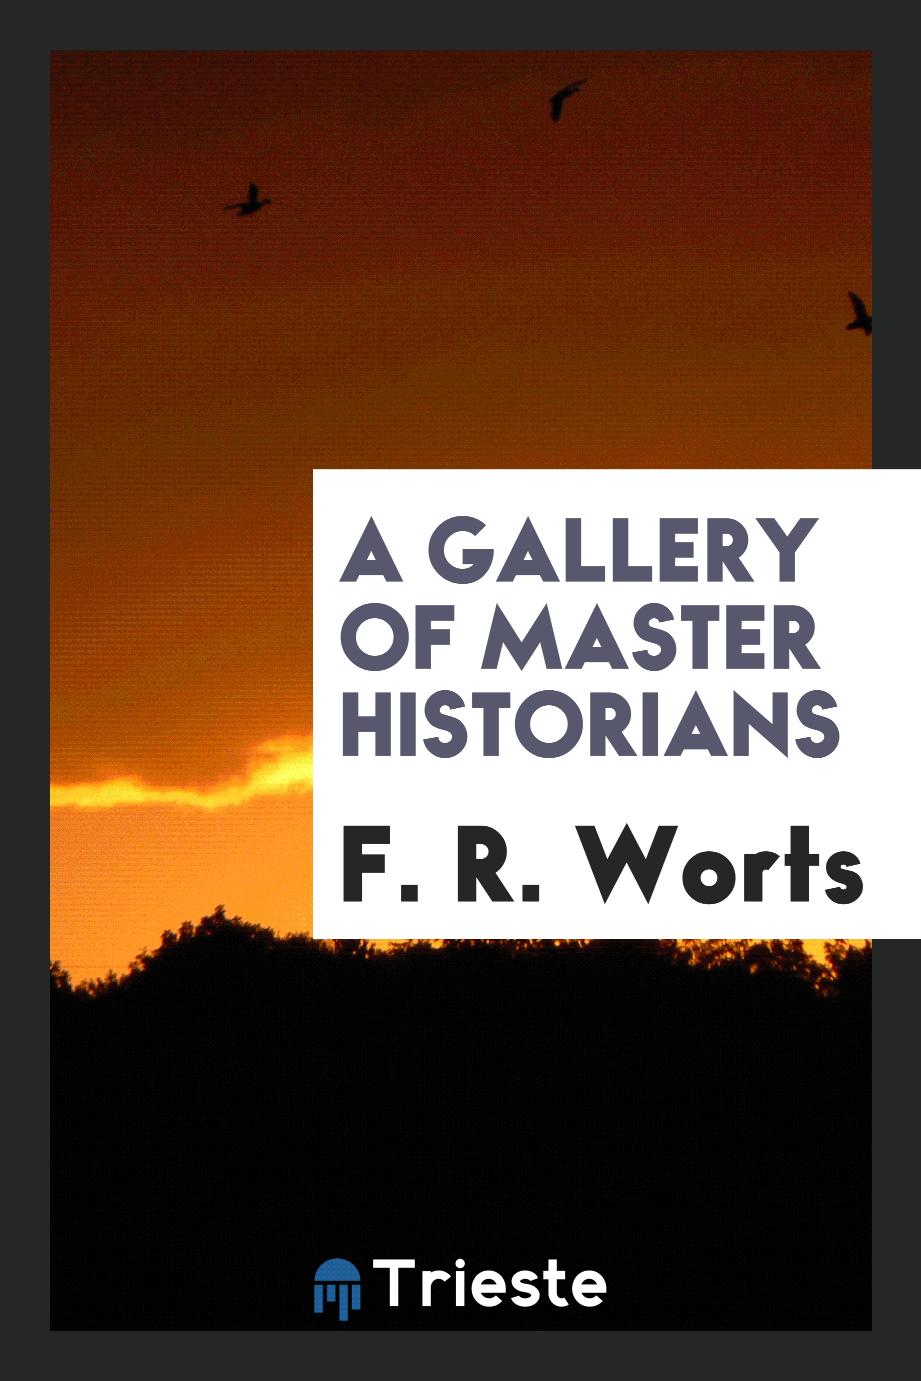 A gallery of master historians